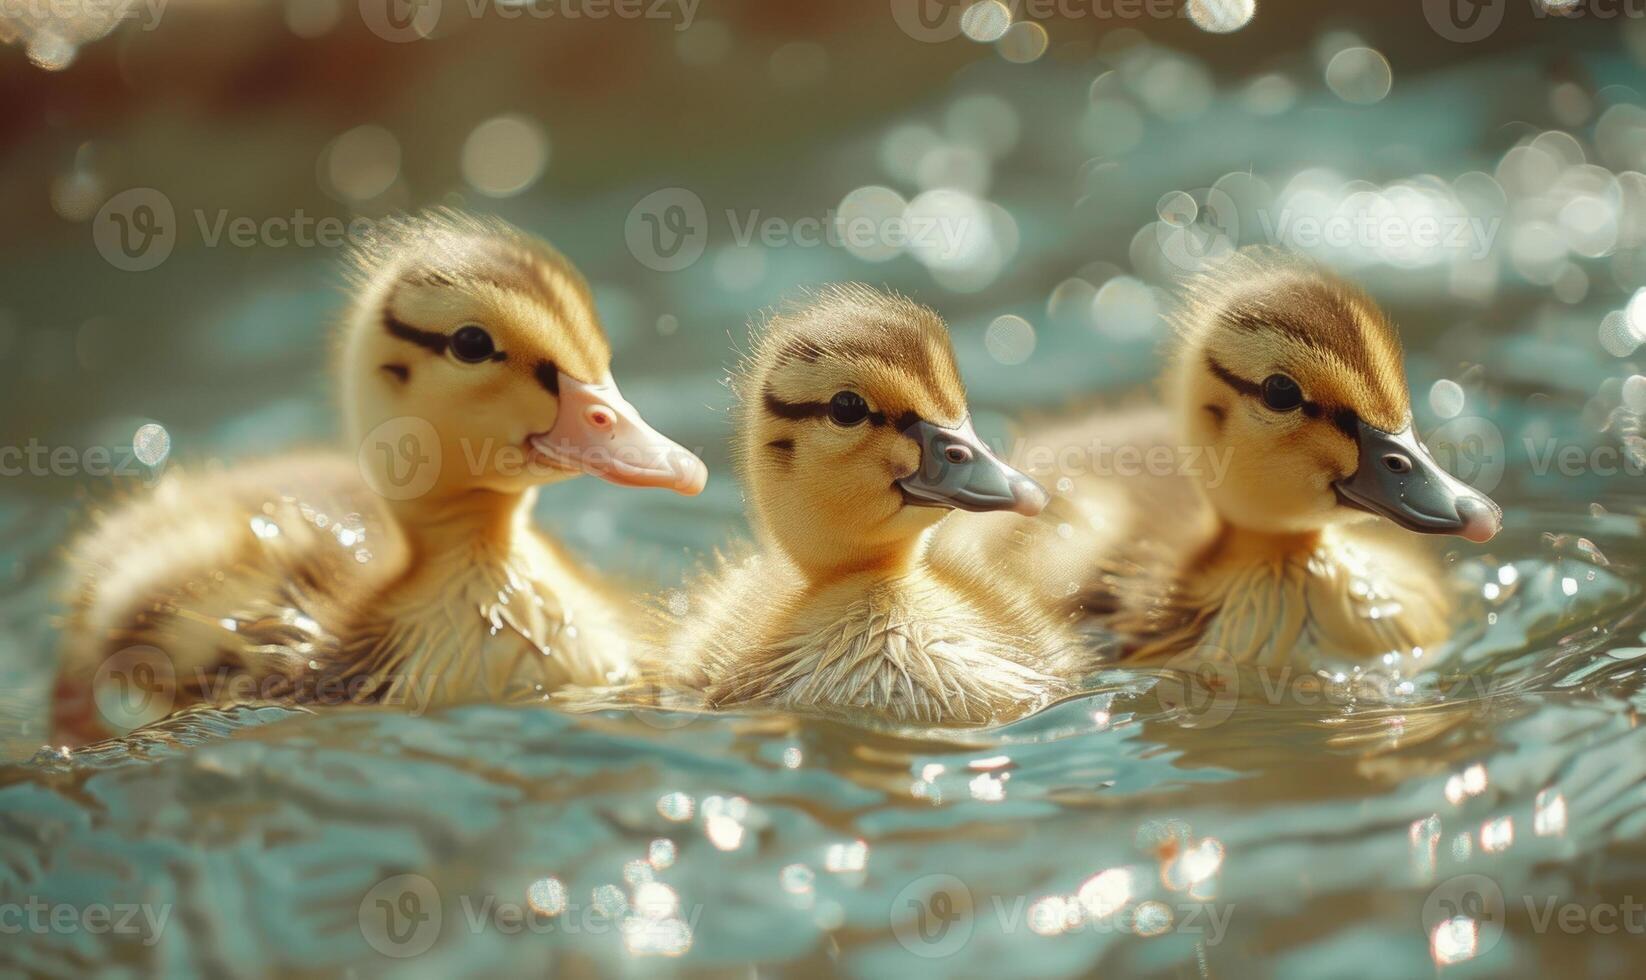 Ducklings swimming in a pond, close up view photo